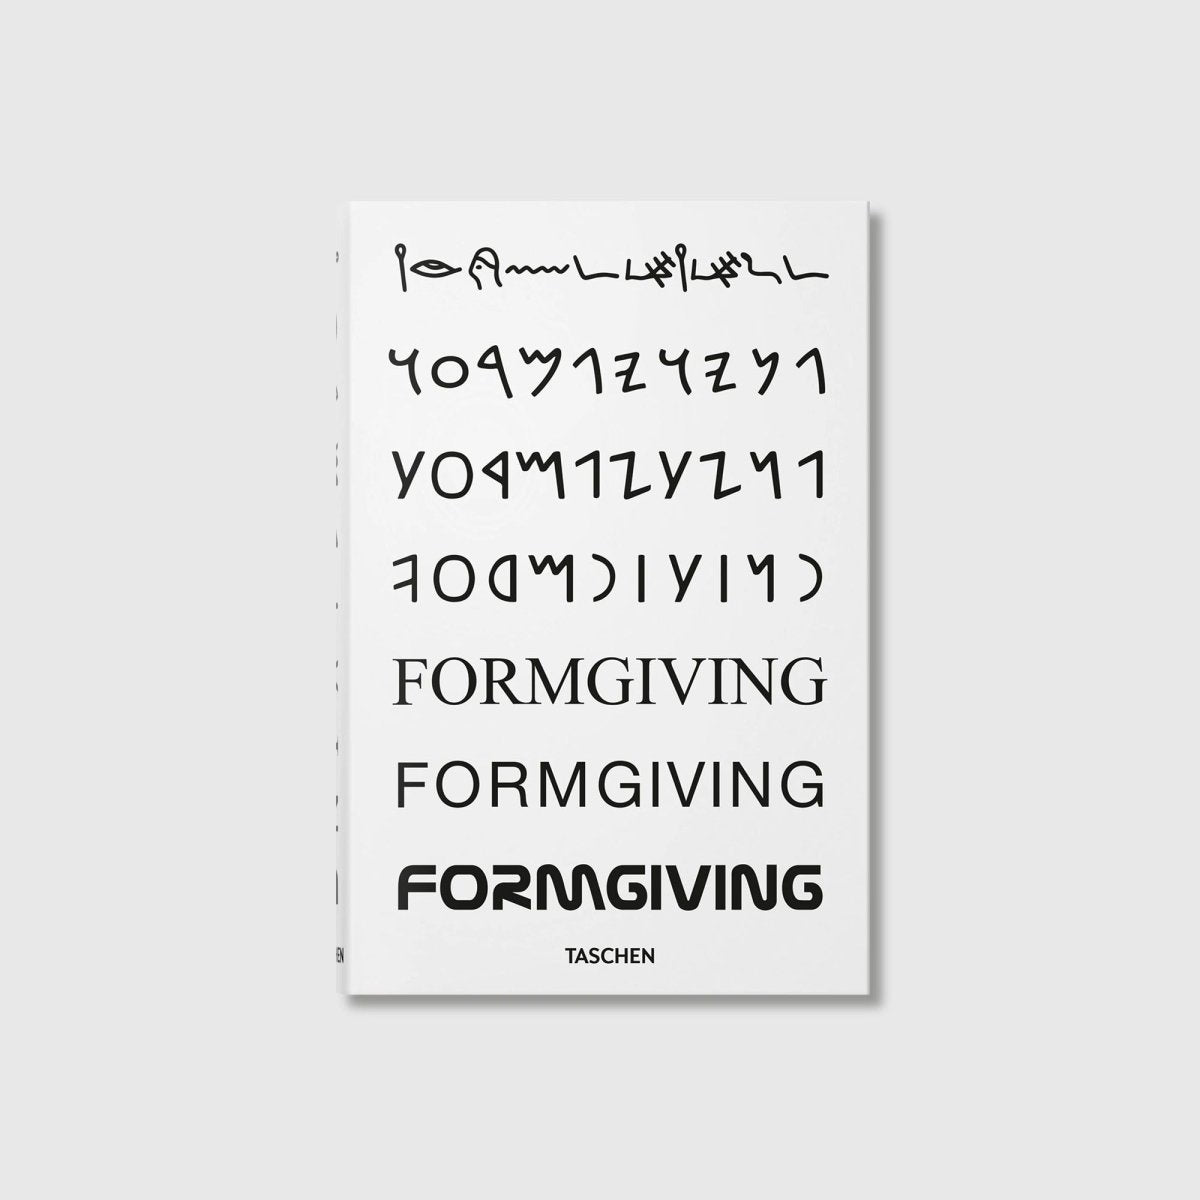 BIG. Formgiving. An Architectural Future History - Autotype